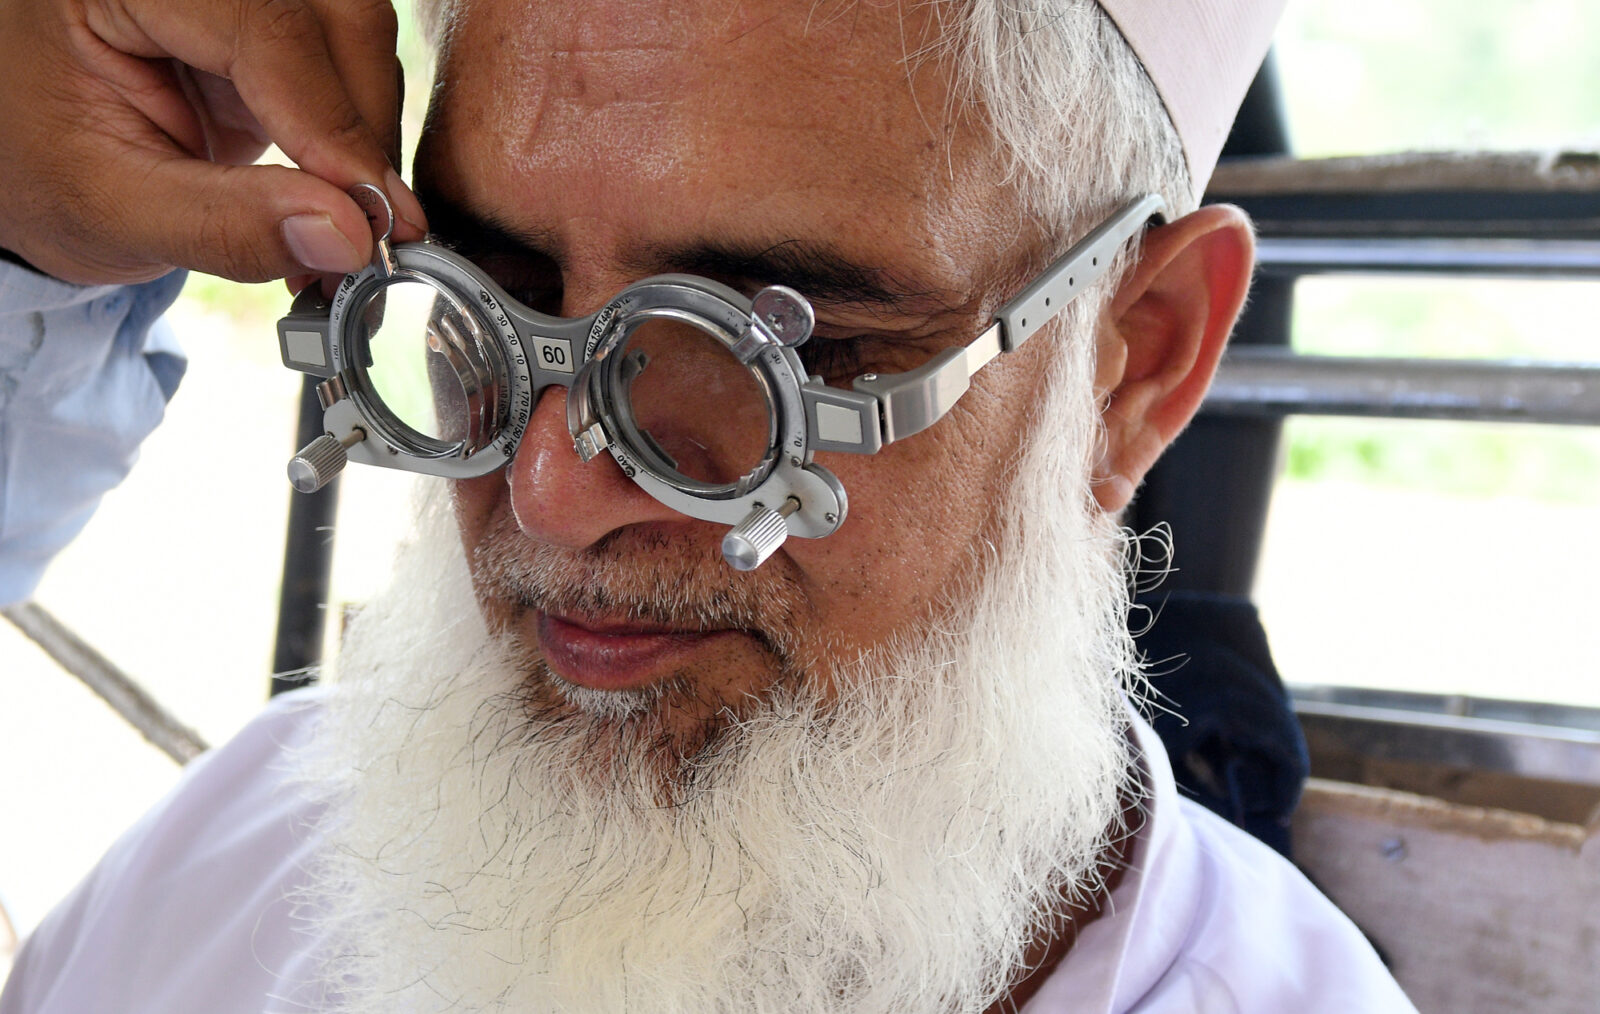 An elderly man with a grey beard tries on glasses as part of an eye test.